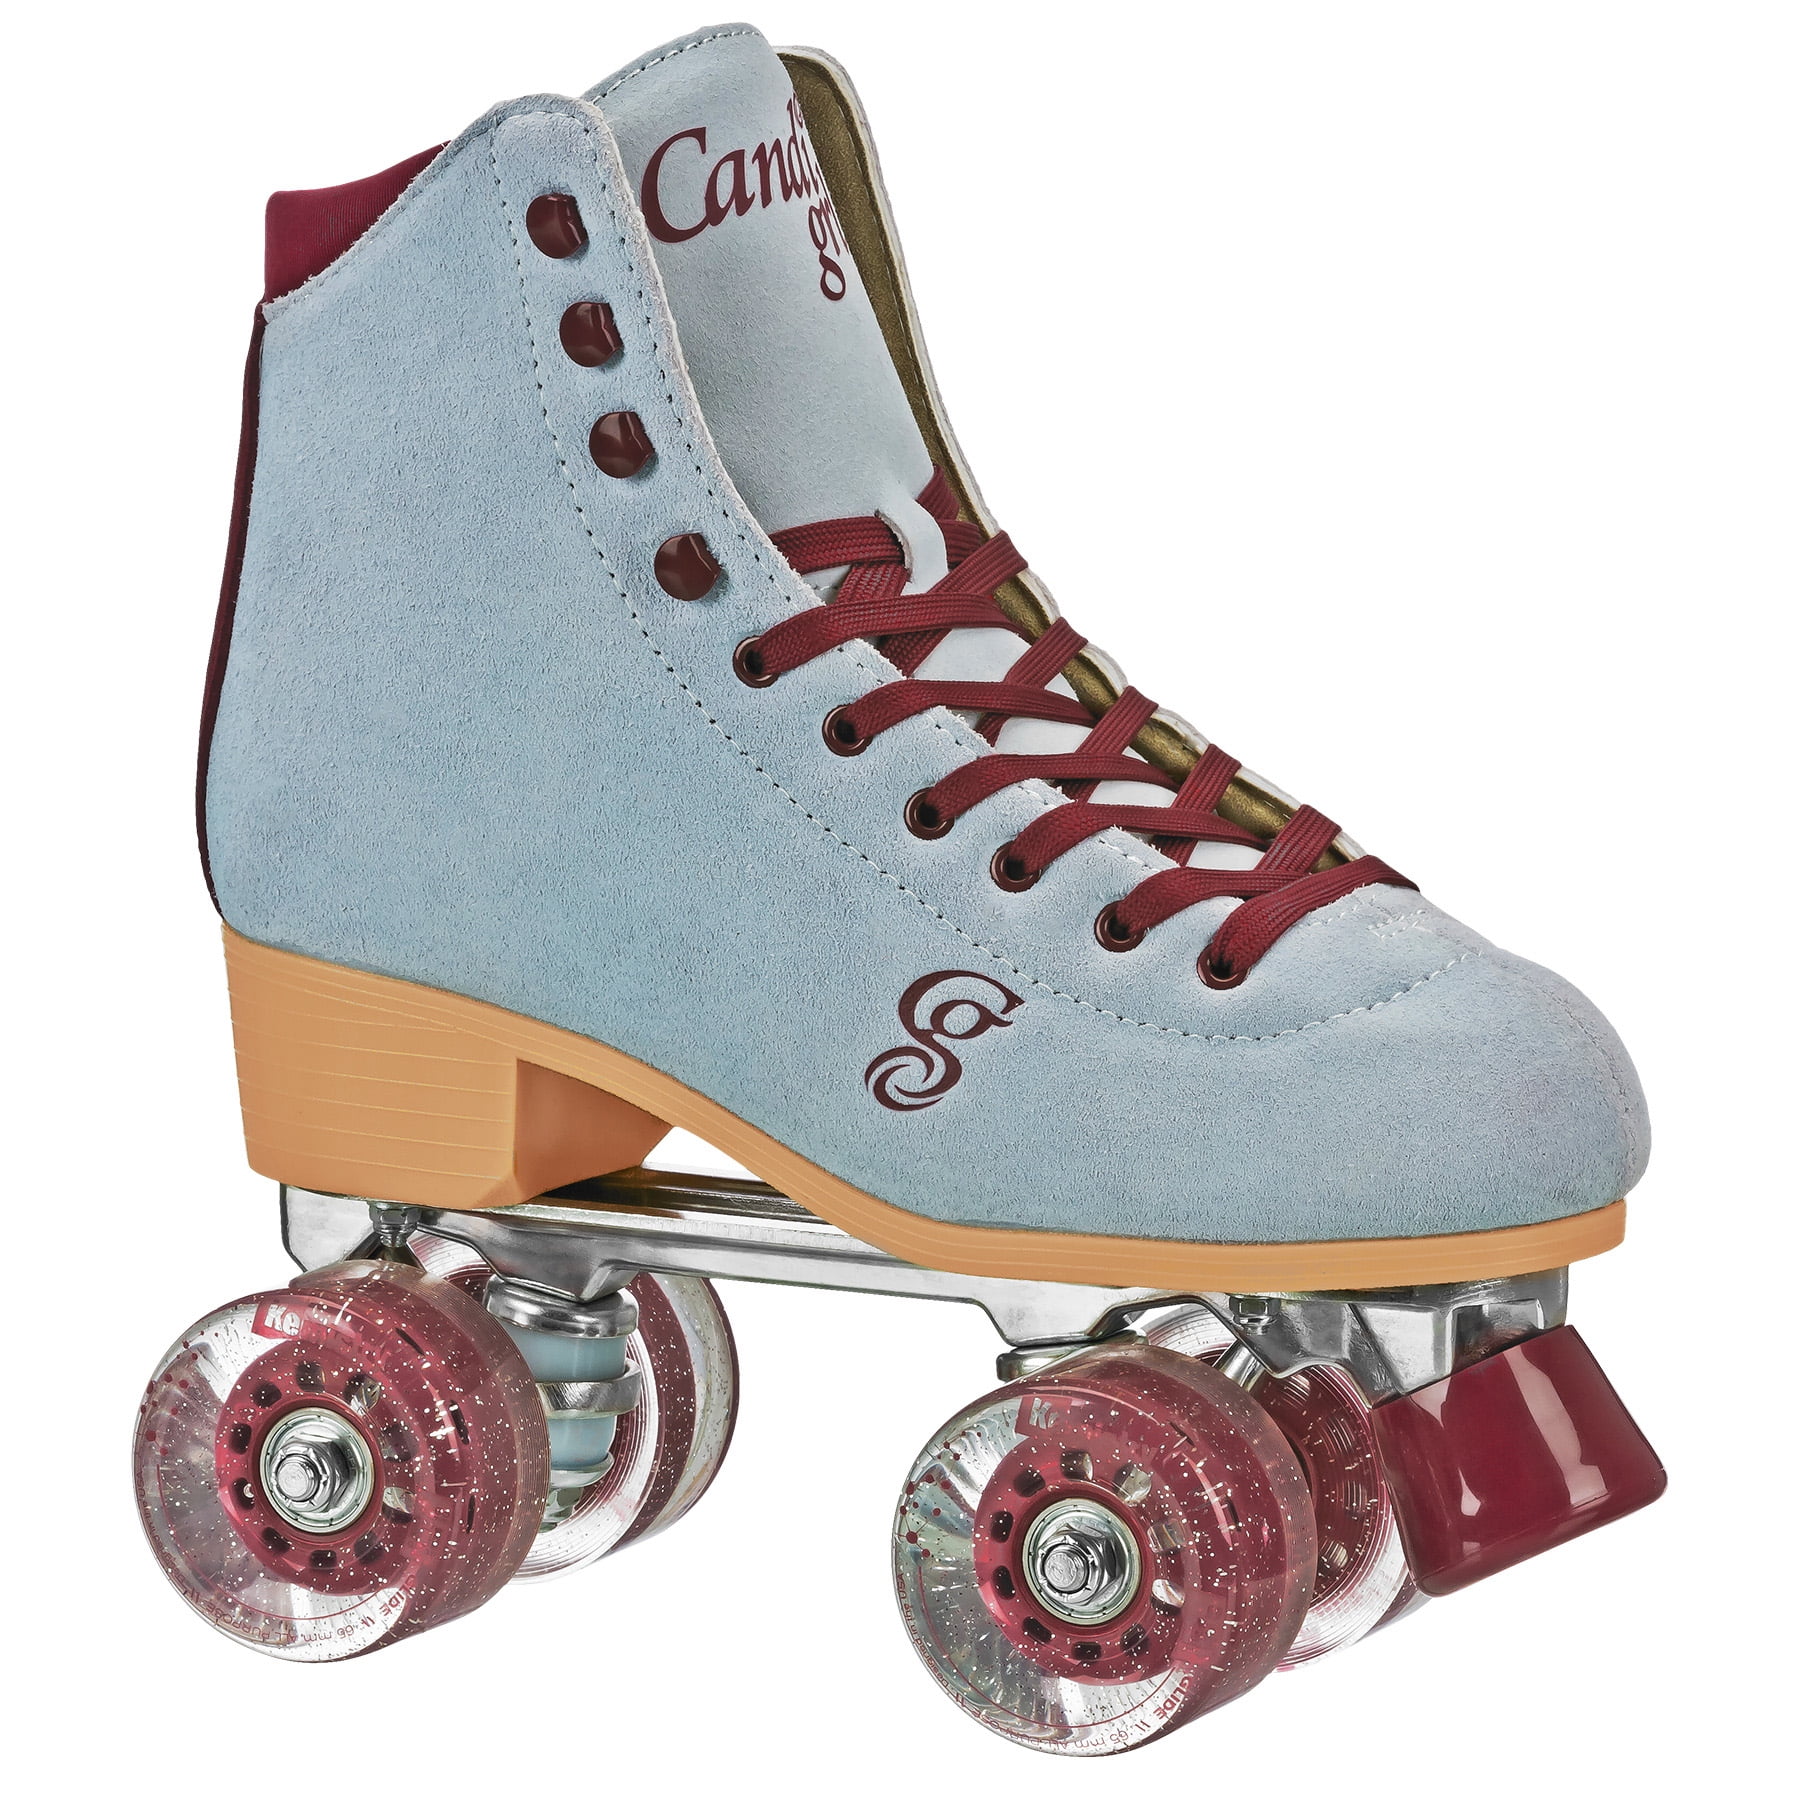 ROLLER SKATES WOMENS GIRLS YOUTH BLACK COLOR CLEAR WHEELS 